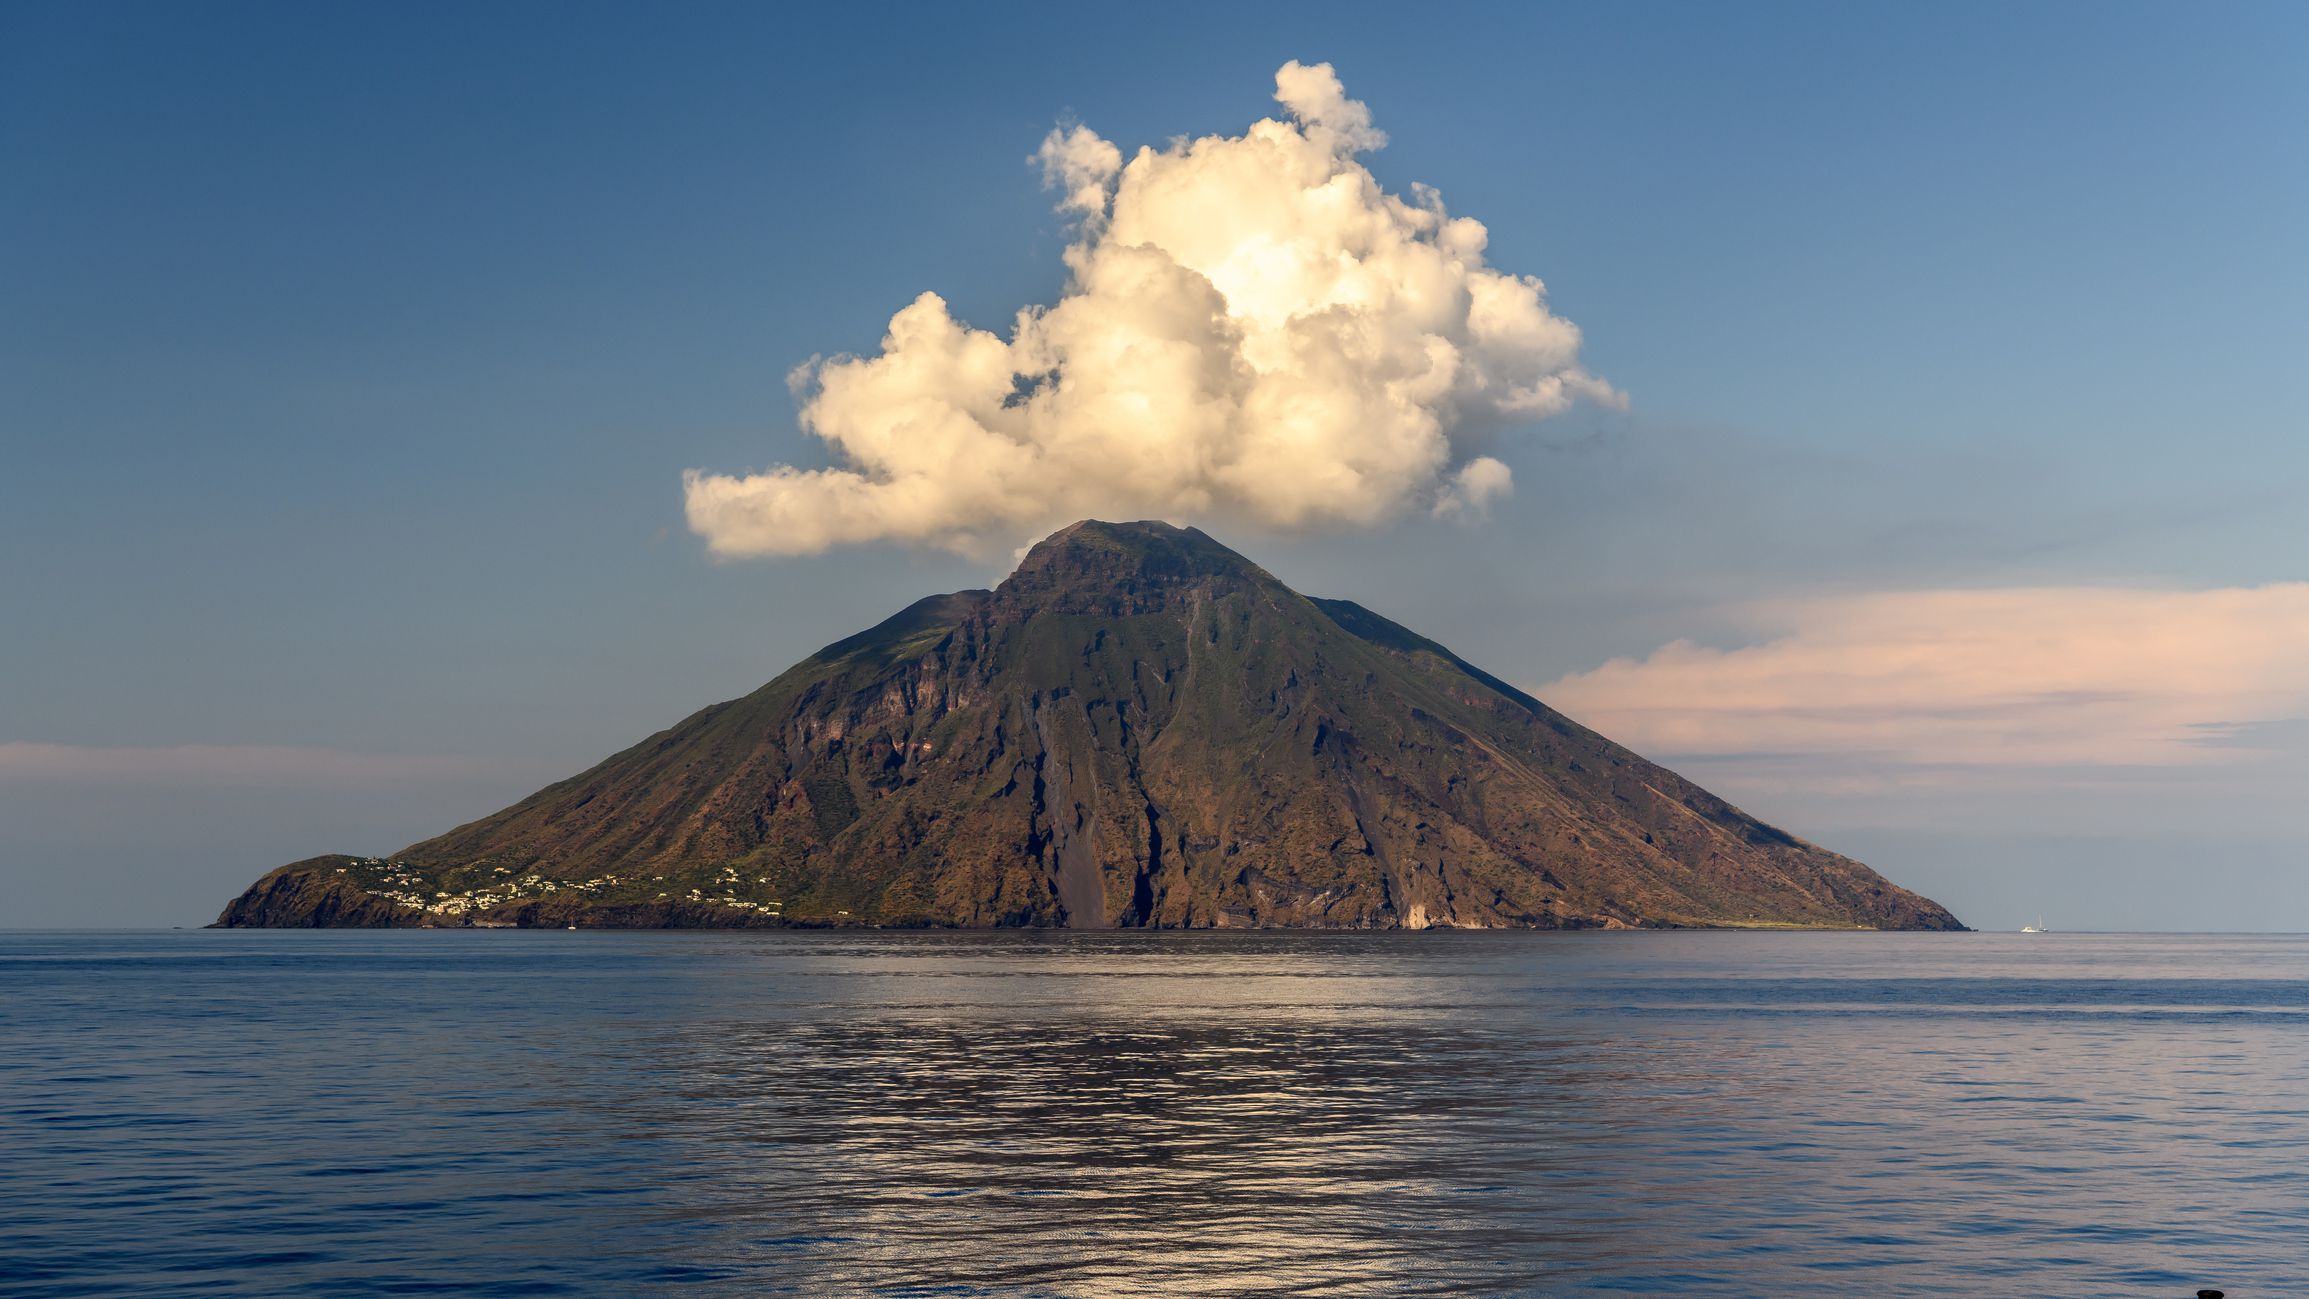 <p><b>Italy<br>Elevation:</b> 3,038 feet</p><p>Stromboli has been erupting almost continuously since 1932, making it one of Earth's most active volcanoes. Mount Stromboli is an active volcano located in the Mediterranean Sea in southern Italy. Stromboli’s three crater lakes are among the deepest in the world. Because it has been active for much of the last 2,000 years and its eruptions are visible for long distances at night, it is known as the "<a href="https://geology.com/volcanoes/stromboli/">Lighthouse of the Mediterranean.</a>"       </p>